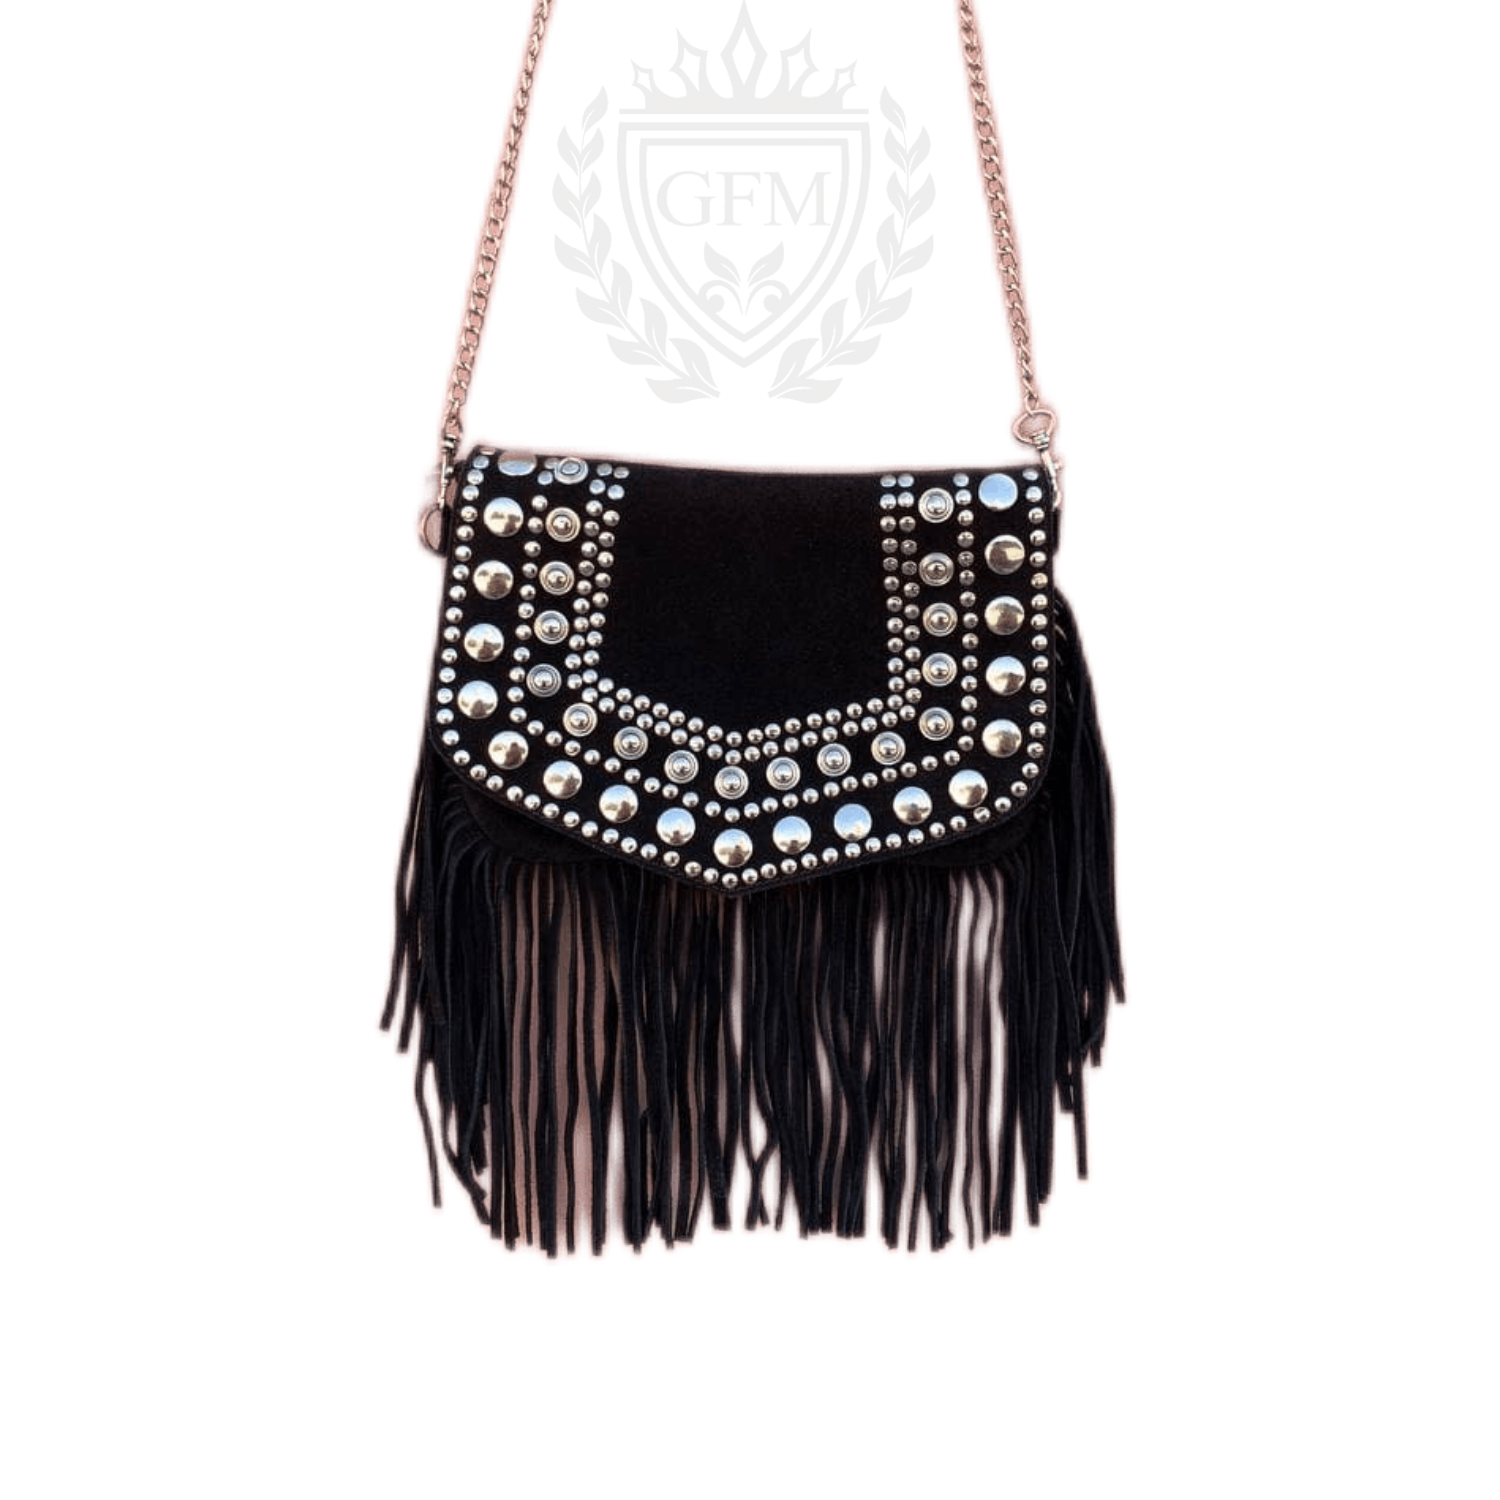 Moroccan Leather Fringe Purse, Boho Style Women's Purse with Glitter Accents